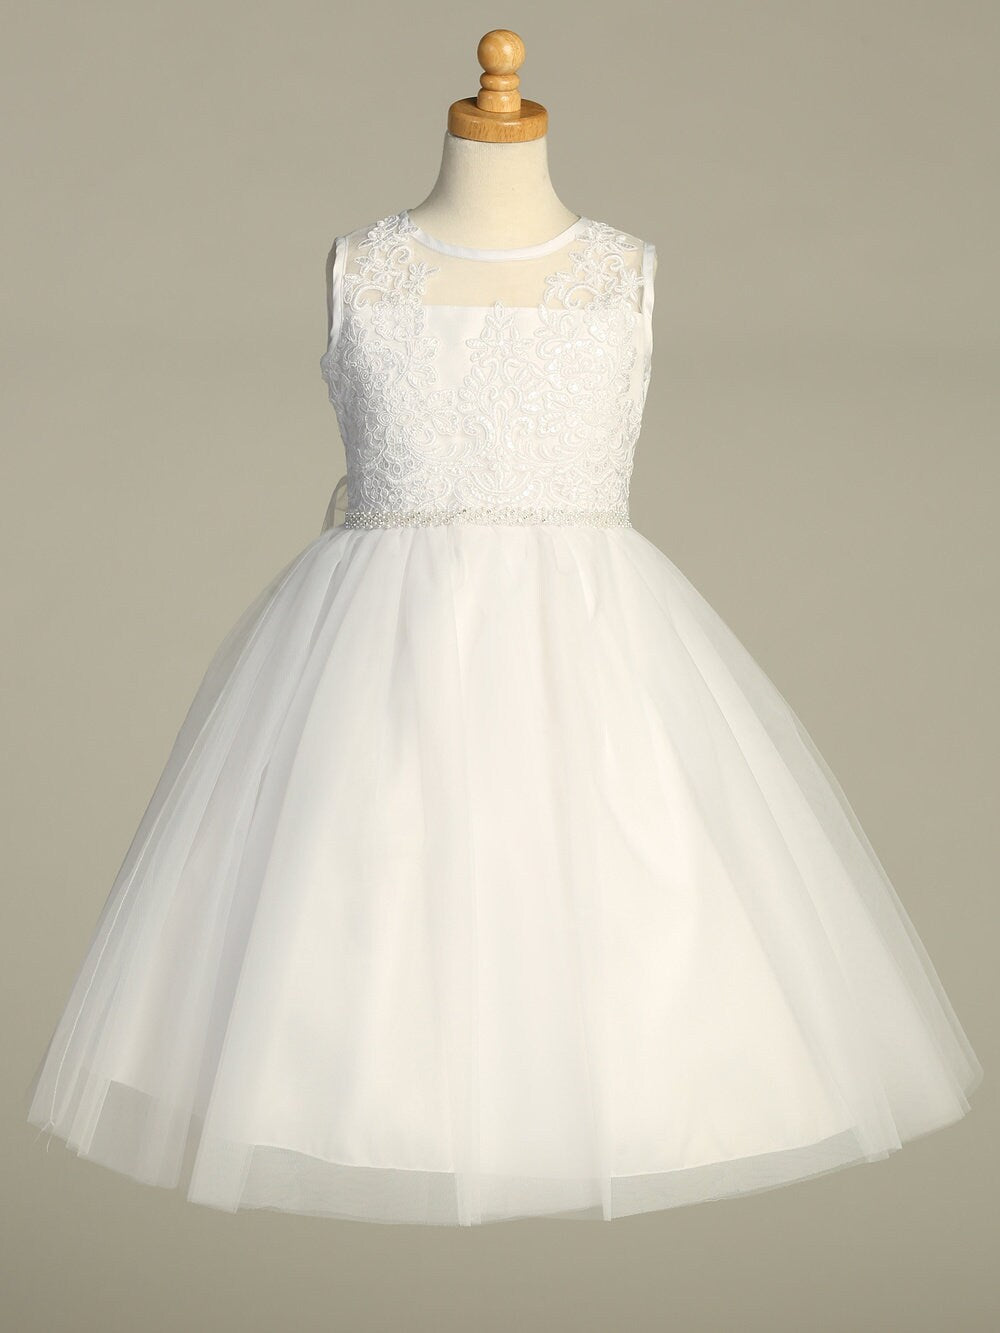 A side view of the First Communion Dress showing the corded embroidered tulle with sequins, and the elegant silhouette of the tea-length dress.